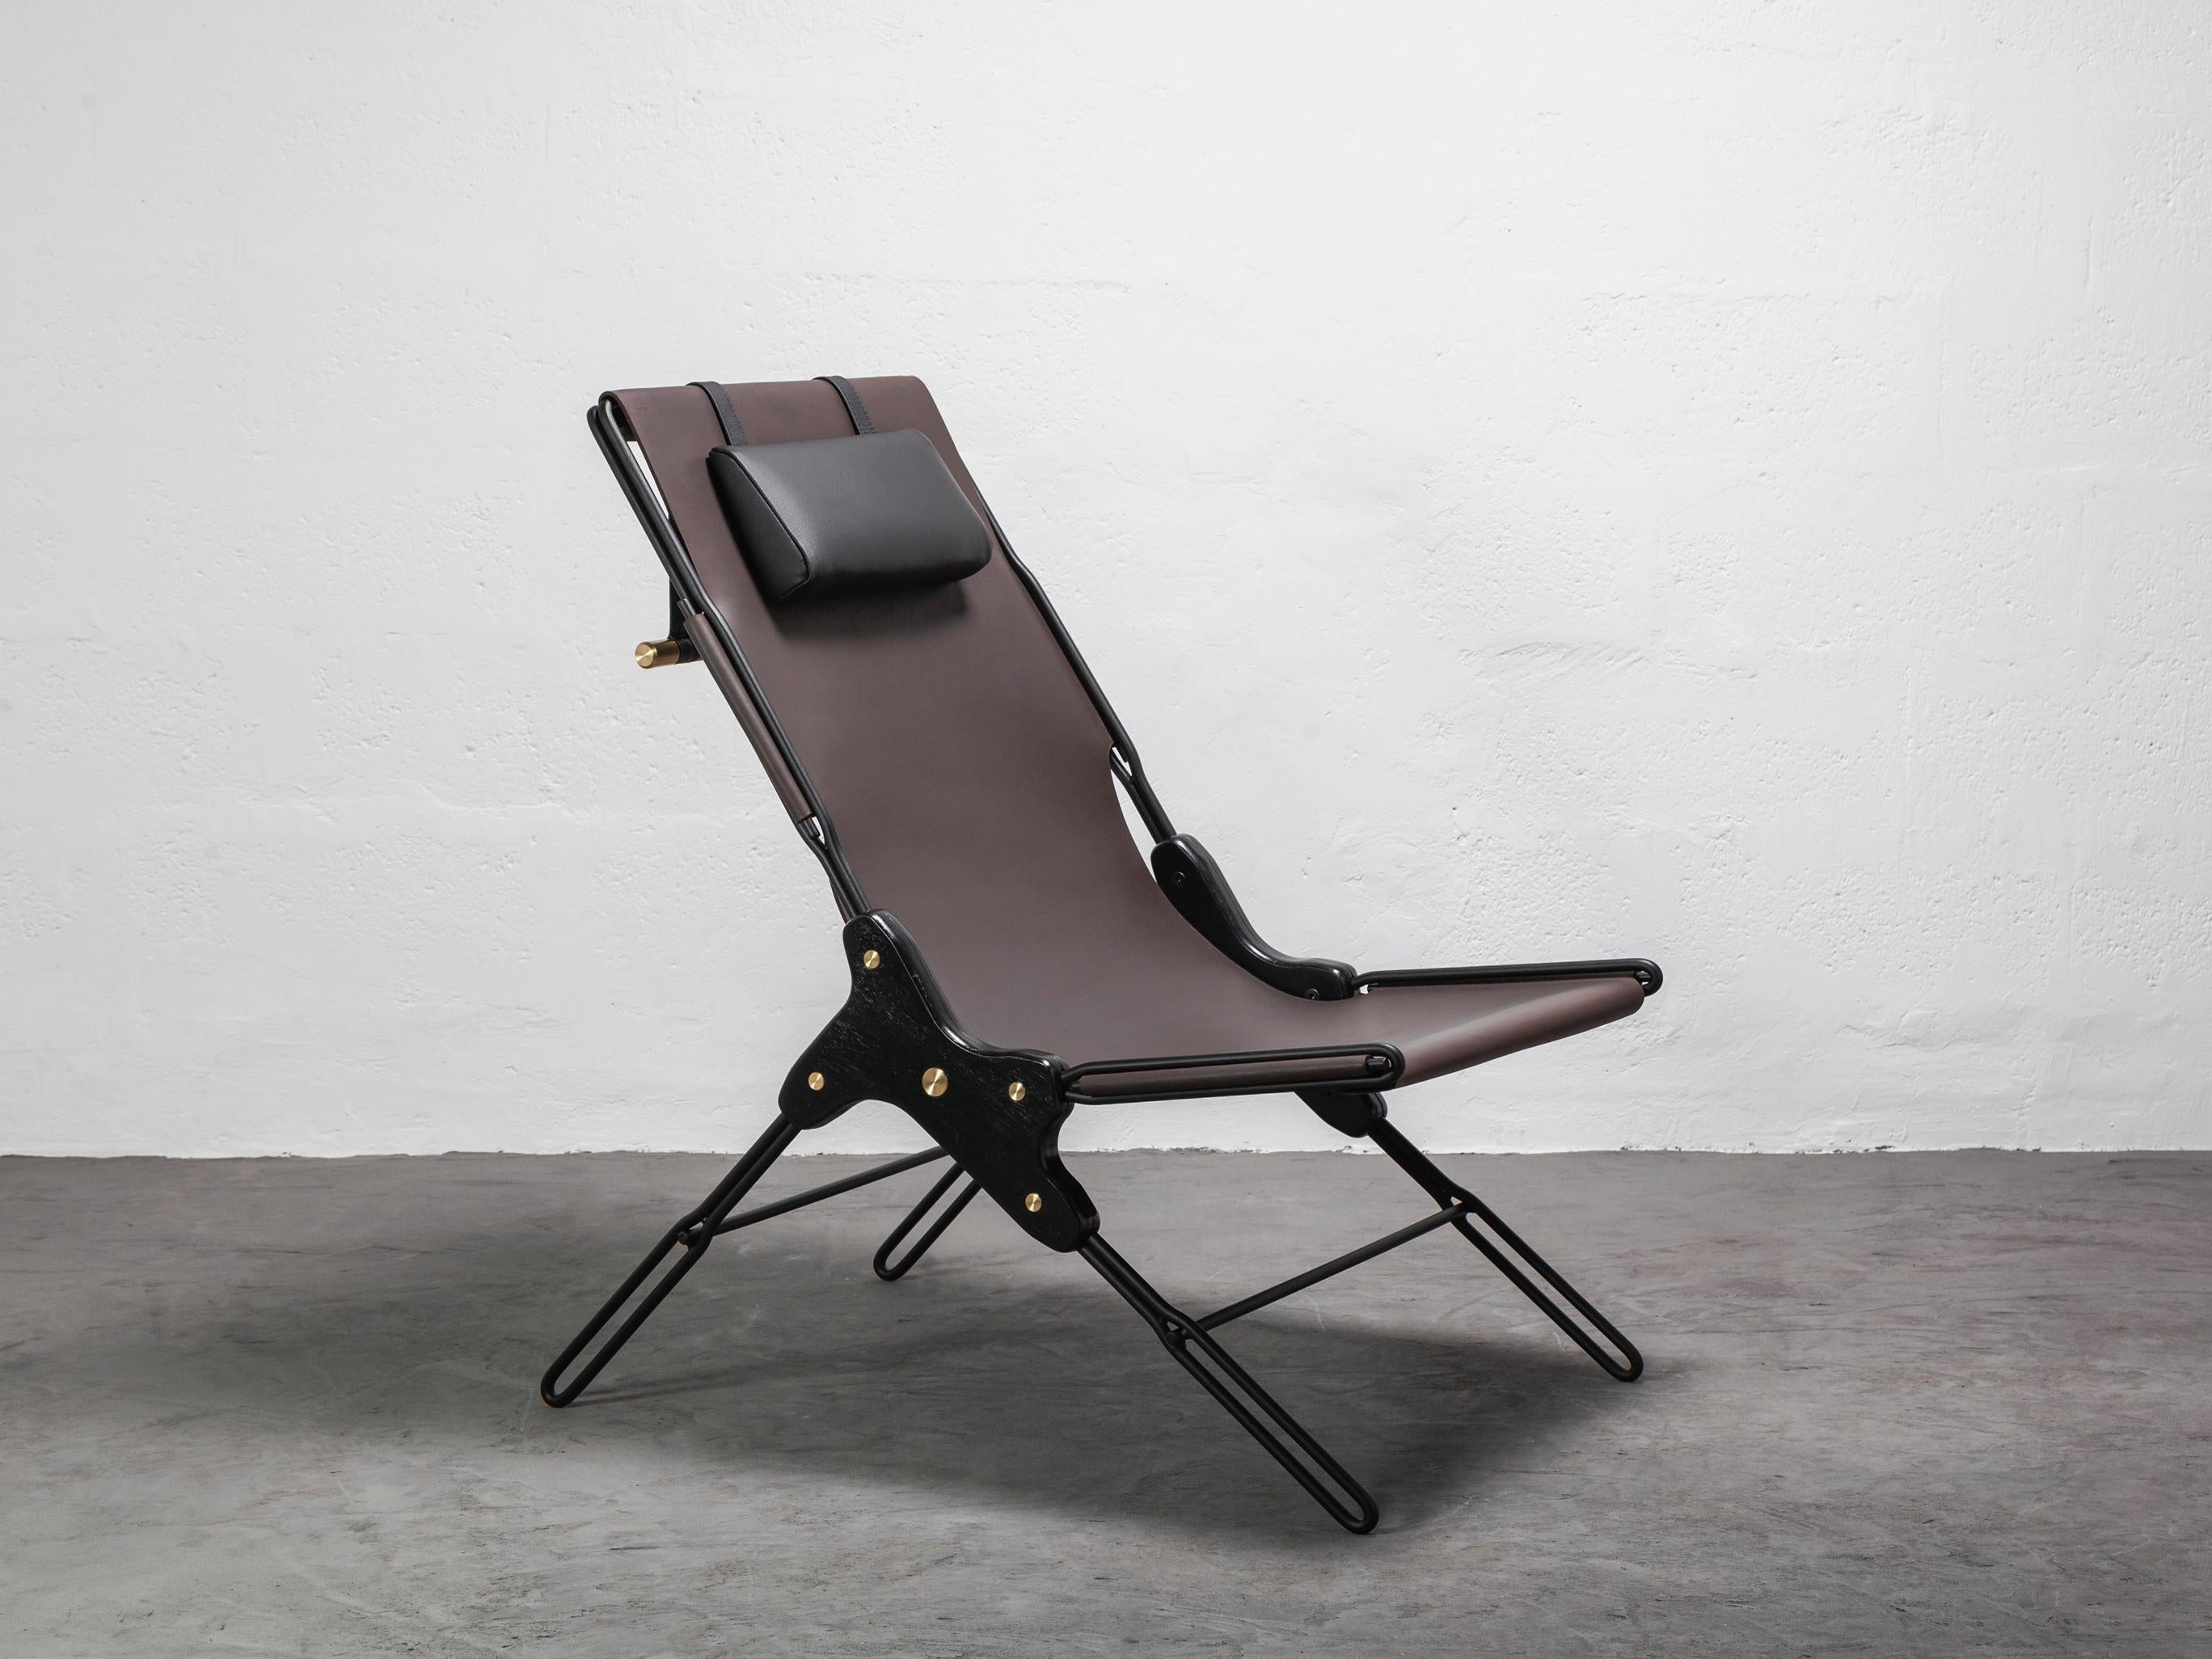 Lounge chair made of black finish steel rod structure and solid colorado wood with a natural oil finish, Ecuadorian cowhide leather seat, and lathed bronze or stainless steel hardware. Available in Olivo, Brown, and Cognac thick leather